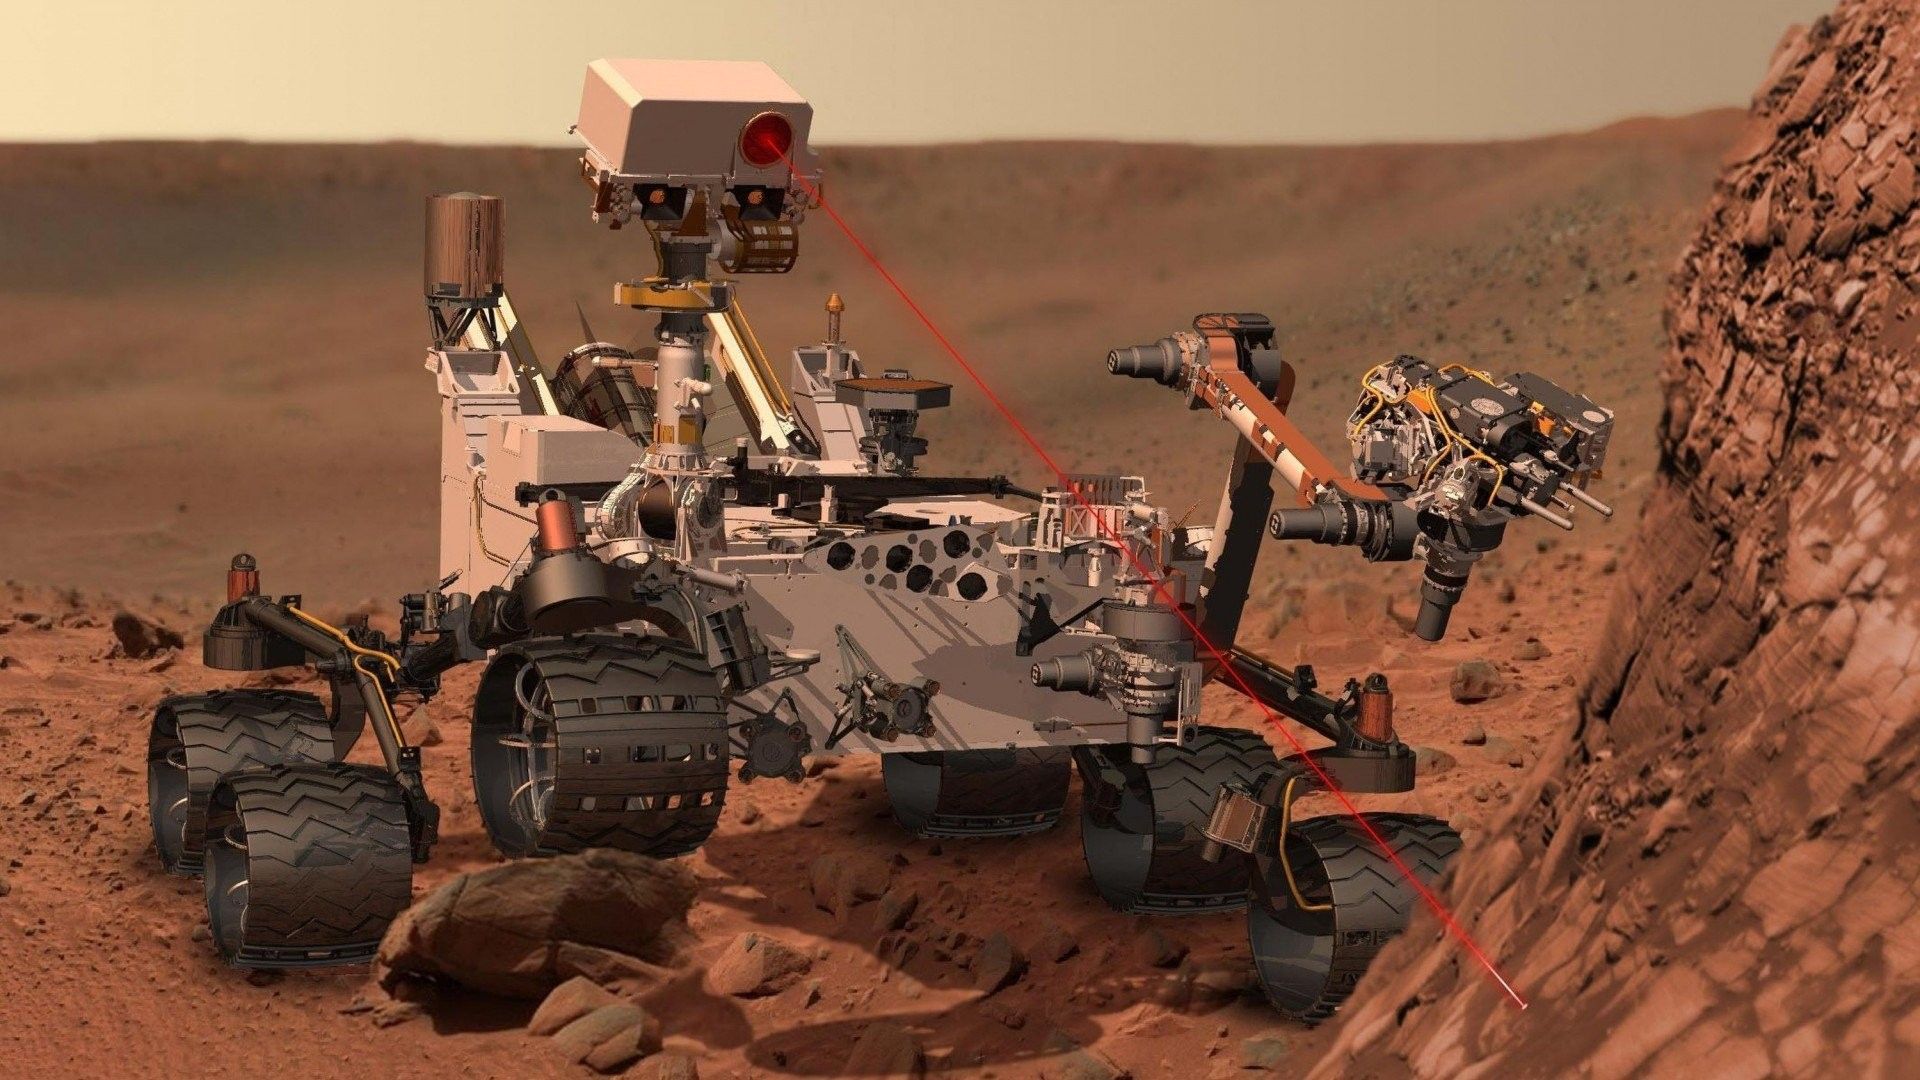 Curiosity Rover Wallpaper Free Curiosity Rover Background